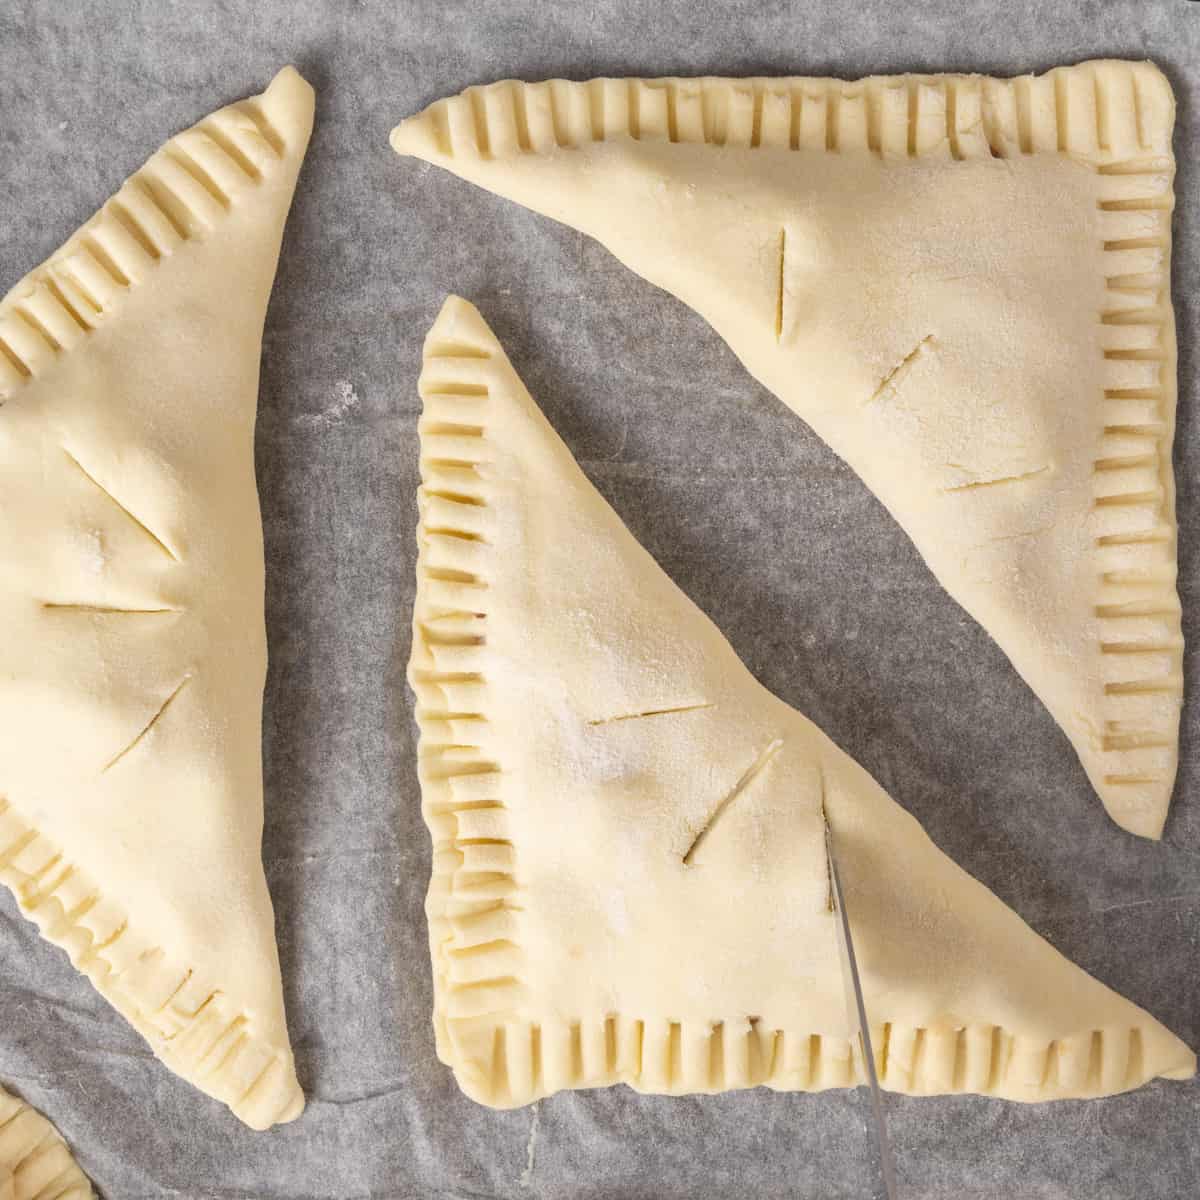 A knife cutting slits into the top of the triangular puff pastry pockets.